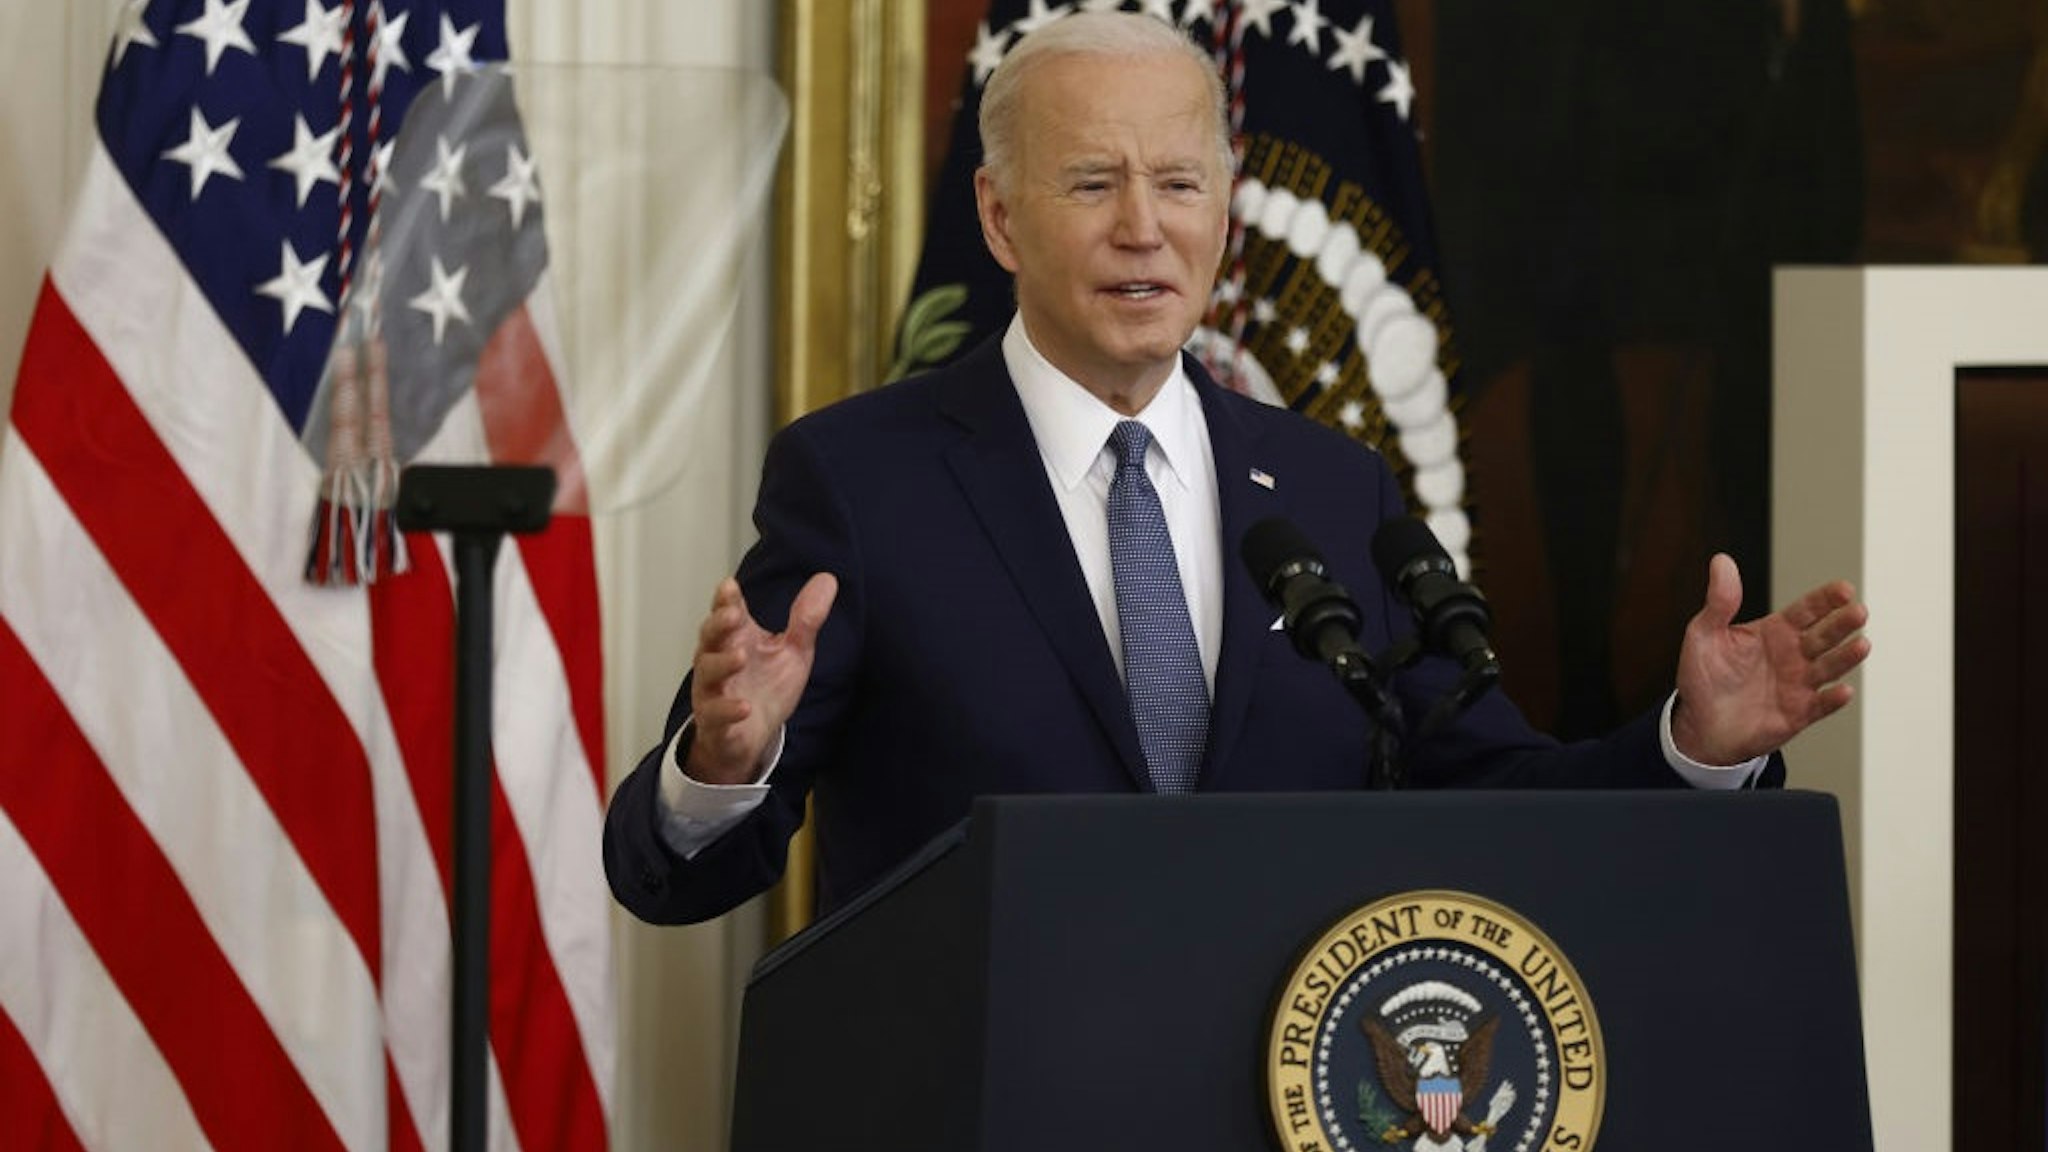 U.S. President Joe Biden speaks during a Black History Month celebration in the East Room of the White House in Washington, D.C., U.S., on Monday, Feb. 28, 2022.